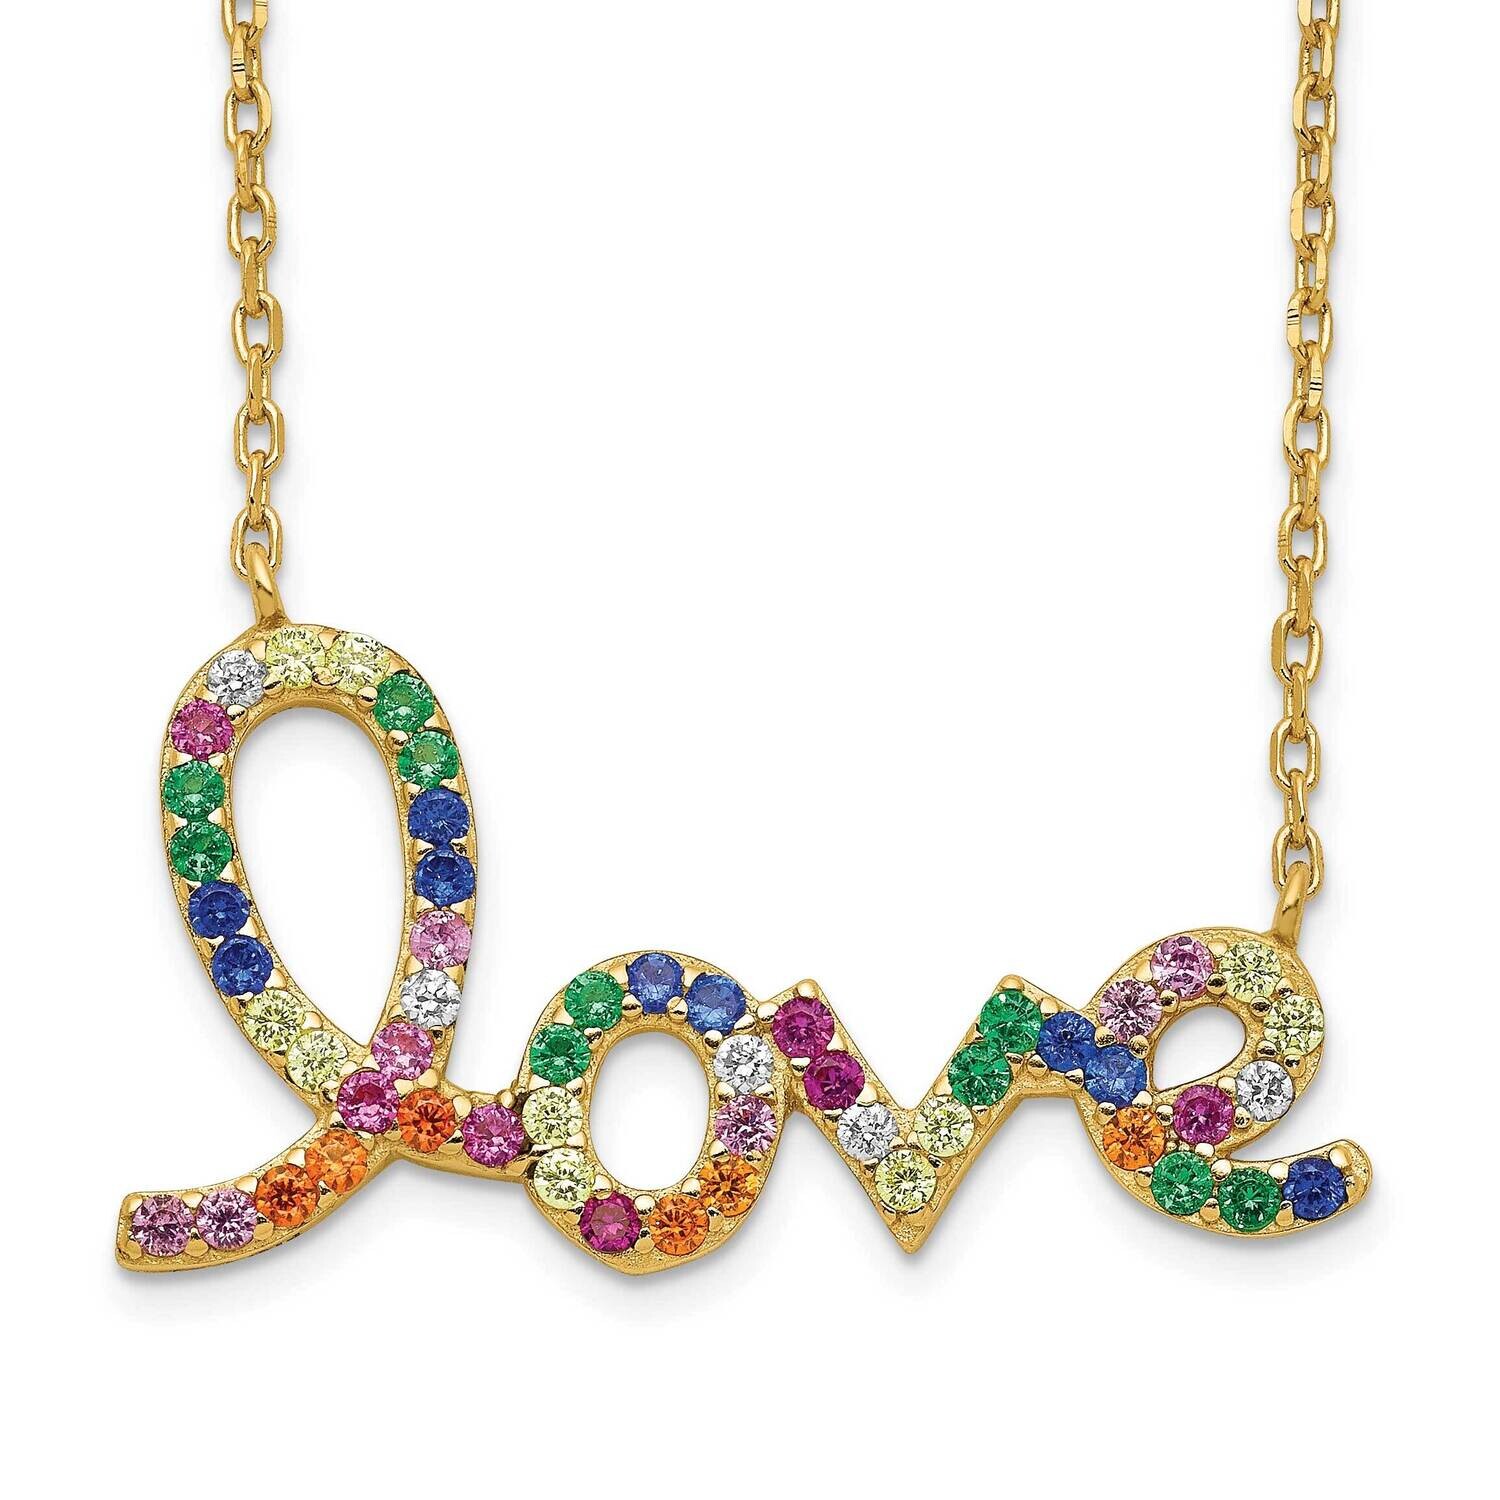 Prizma Flash Gold-Plated 16 Inch Colorful CZ Love Necklace 2 Inch Extender Sterling Silver Gold-Tone 14k QG5042GP-16